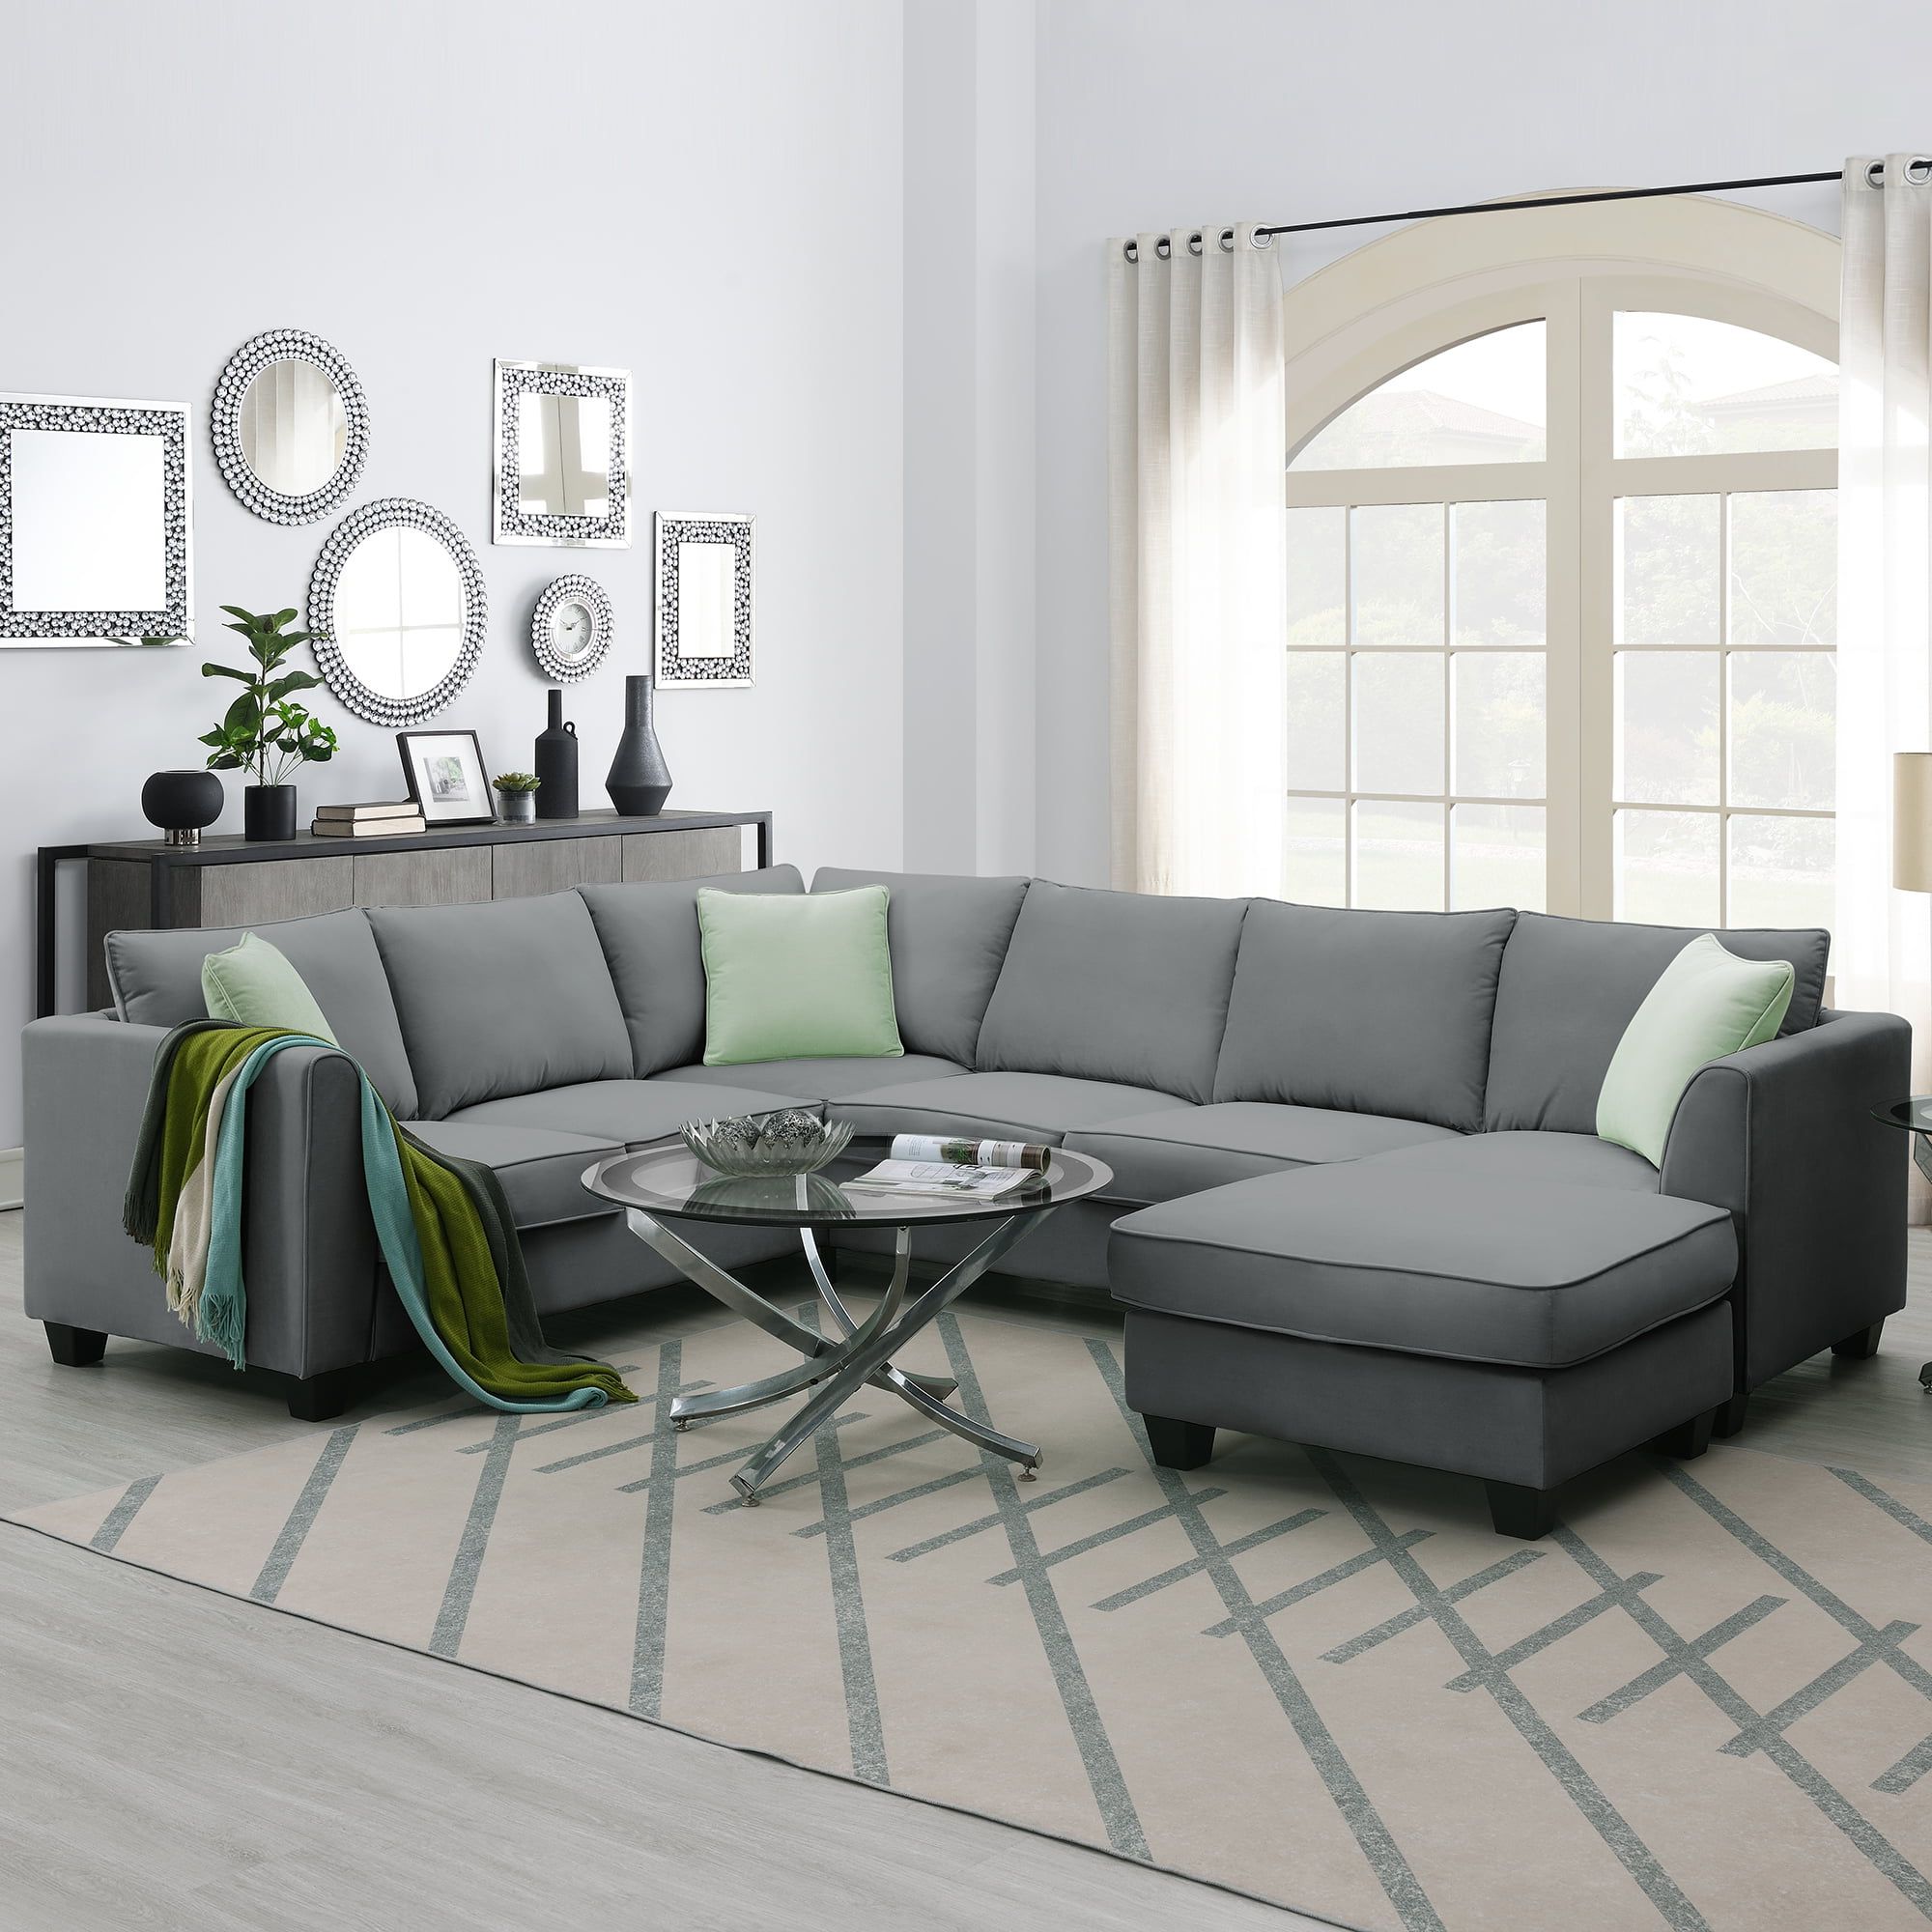 L Shaped Modular Sectional Couch, Kamida 7 Seater Sectional Couch With  Ottoman And 3 Pillows, Modern L Shaped Fabric Upholstered Couch Furniture, Heavy  Duty Sectional Couch For Living Room, Gray – Walmart Inside Heavy Duty Sectional Couches (View 2 of 20)